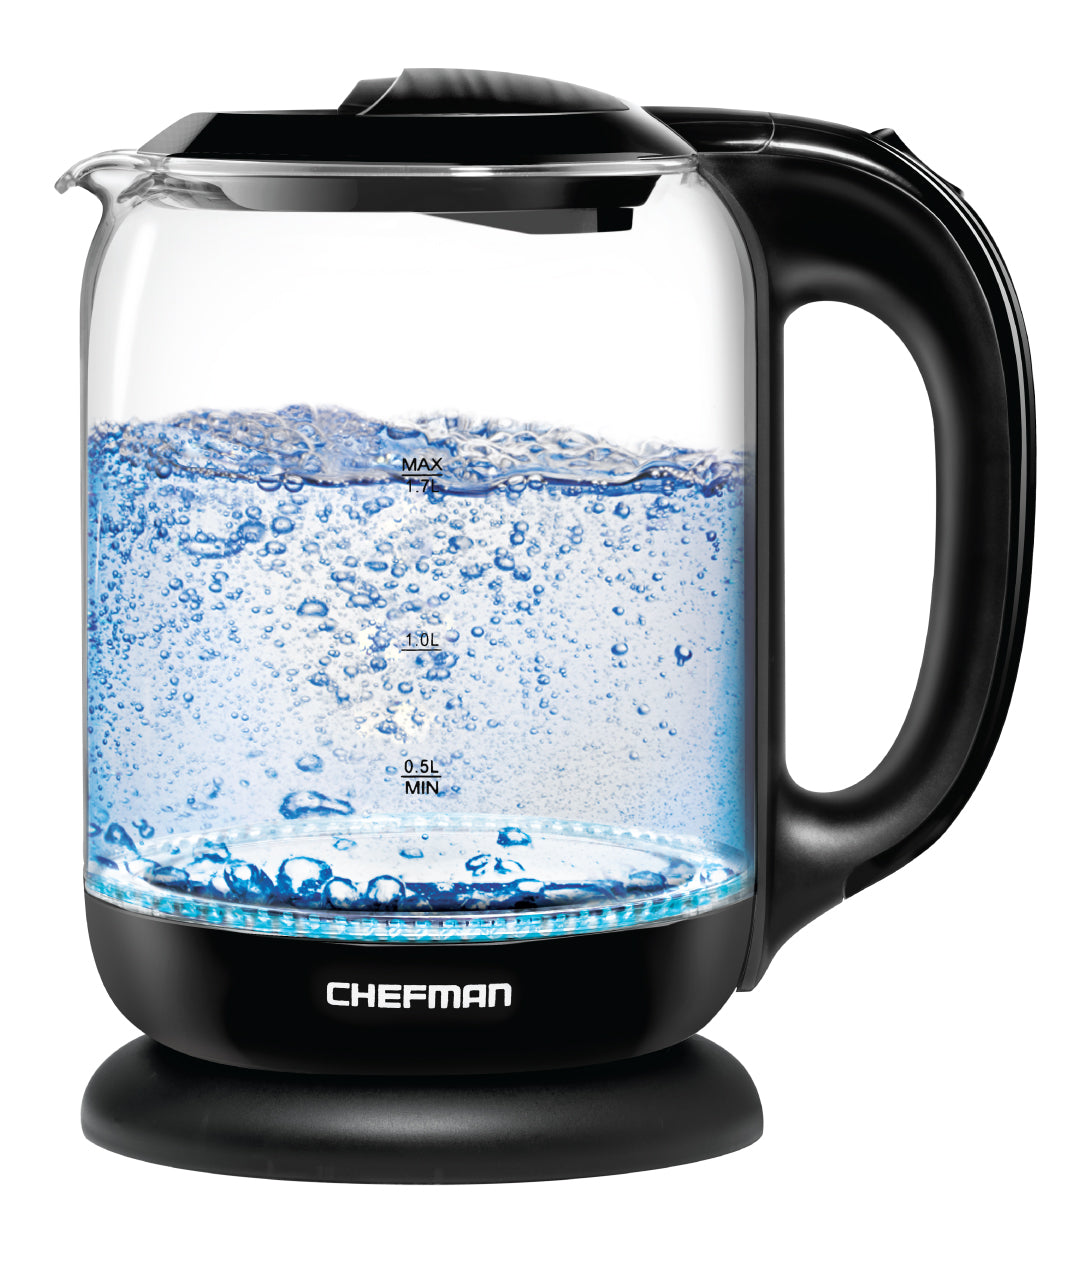 Chefman 1.7 Liter Electric Glass Tea Kettle with One Touch Easy Operation